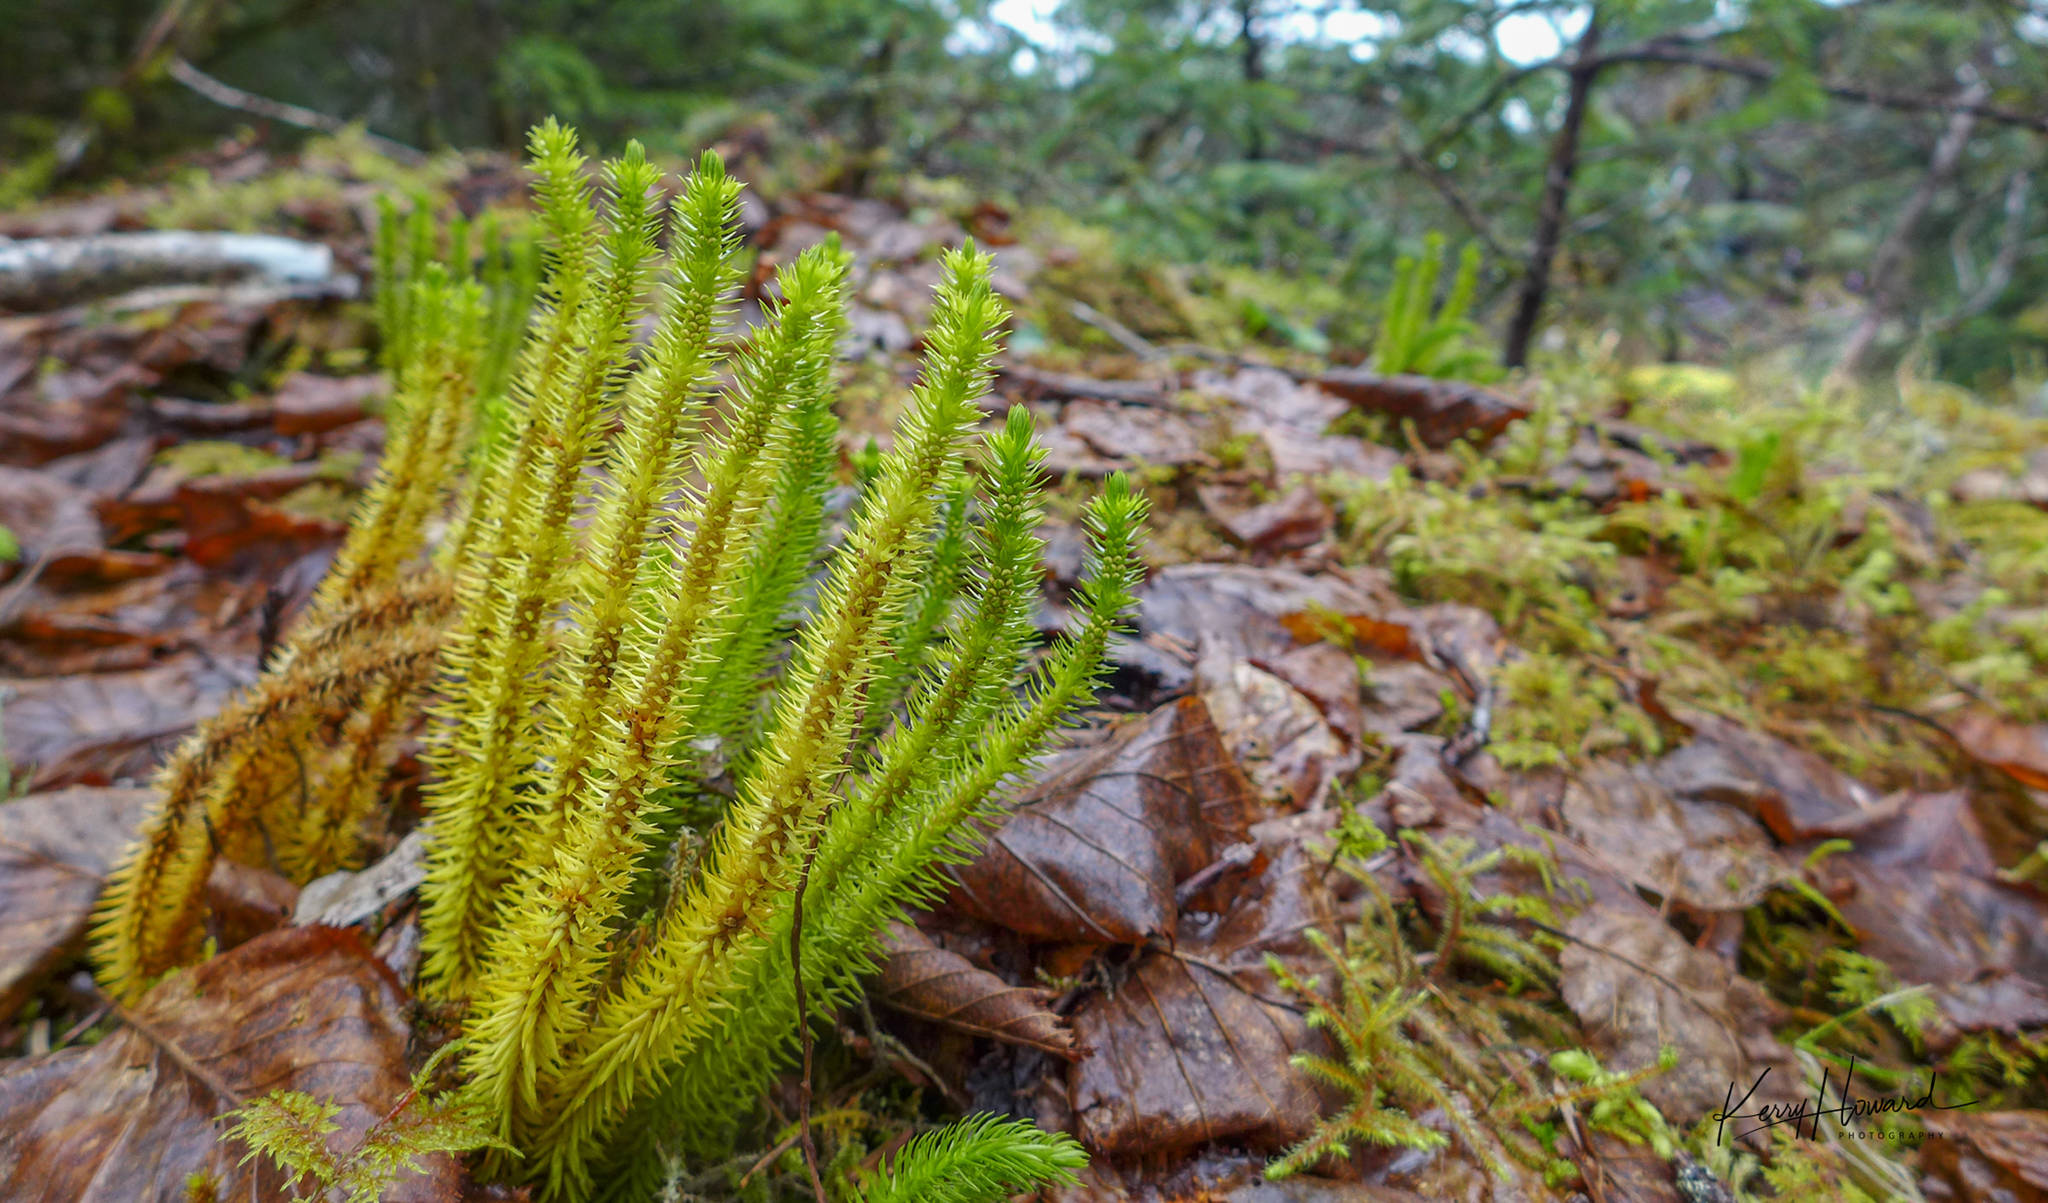 Club moss, a type of fern, seen on East Glacier Trail in Juneau on April 17, 2019. (Courtesy Photo | Kerry Howard)